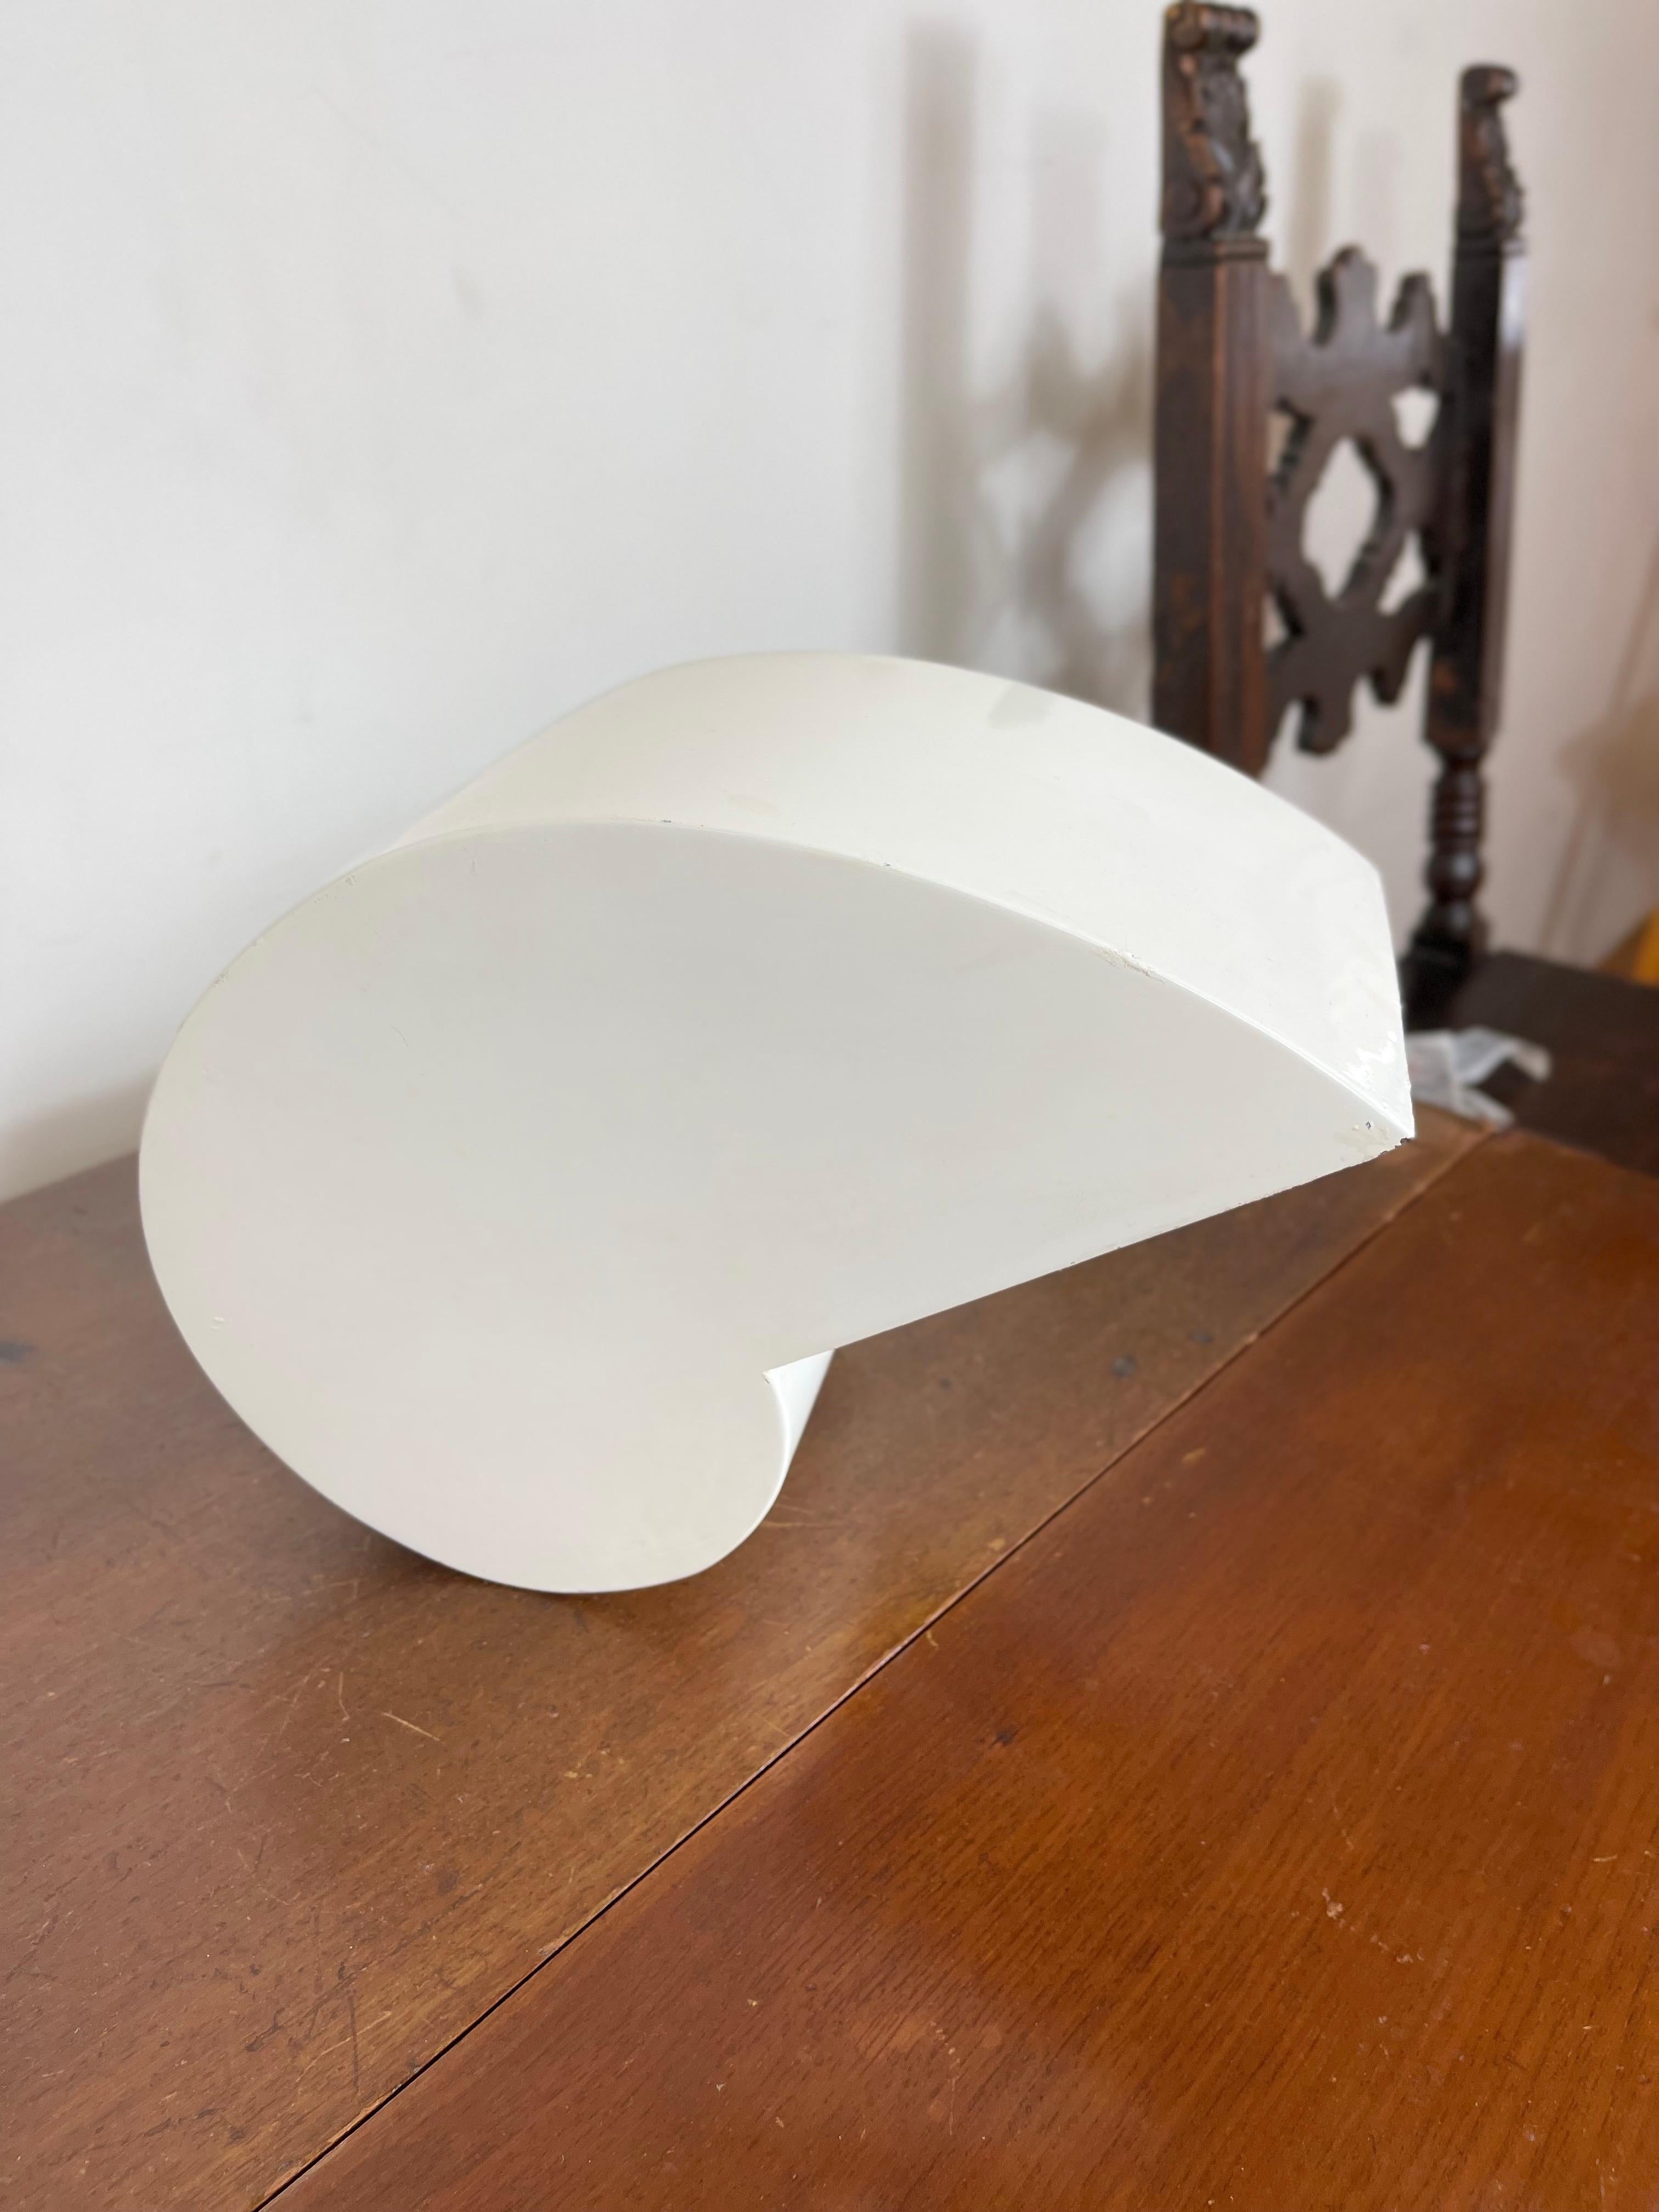 Rare Giuseppe Raimondi Snail table lamp designed in the 1970s, for iconic maker Studio Luce. Chiocciola translate from Italian to 'snail' and it's evocative of it's design. A very rare one of a kind table lamp, made of white lacquered metal,